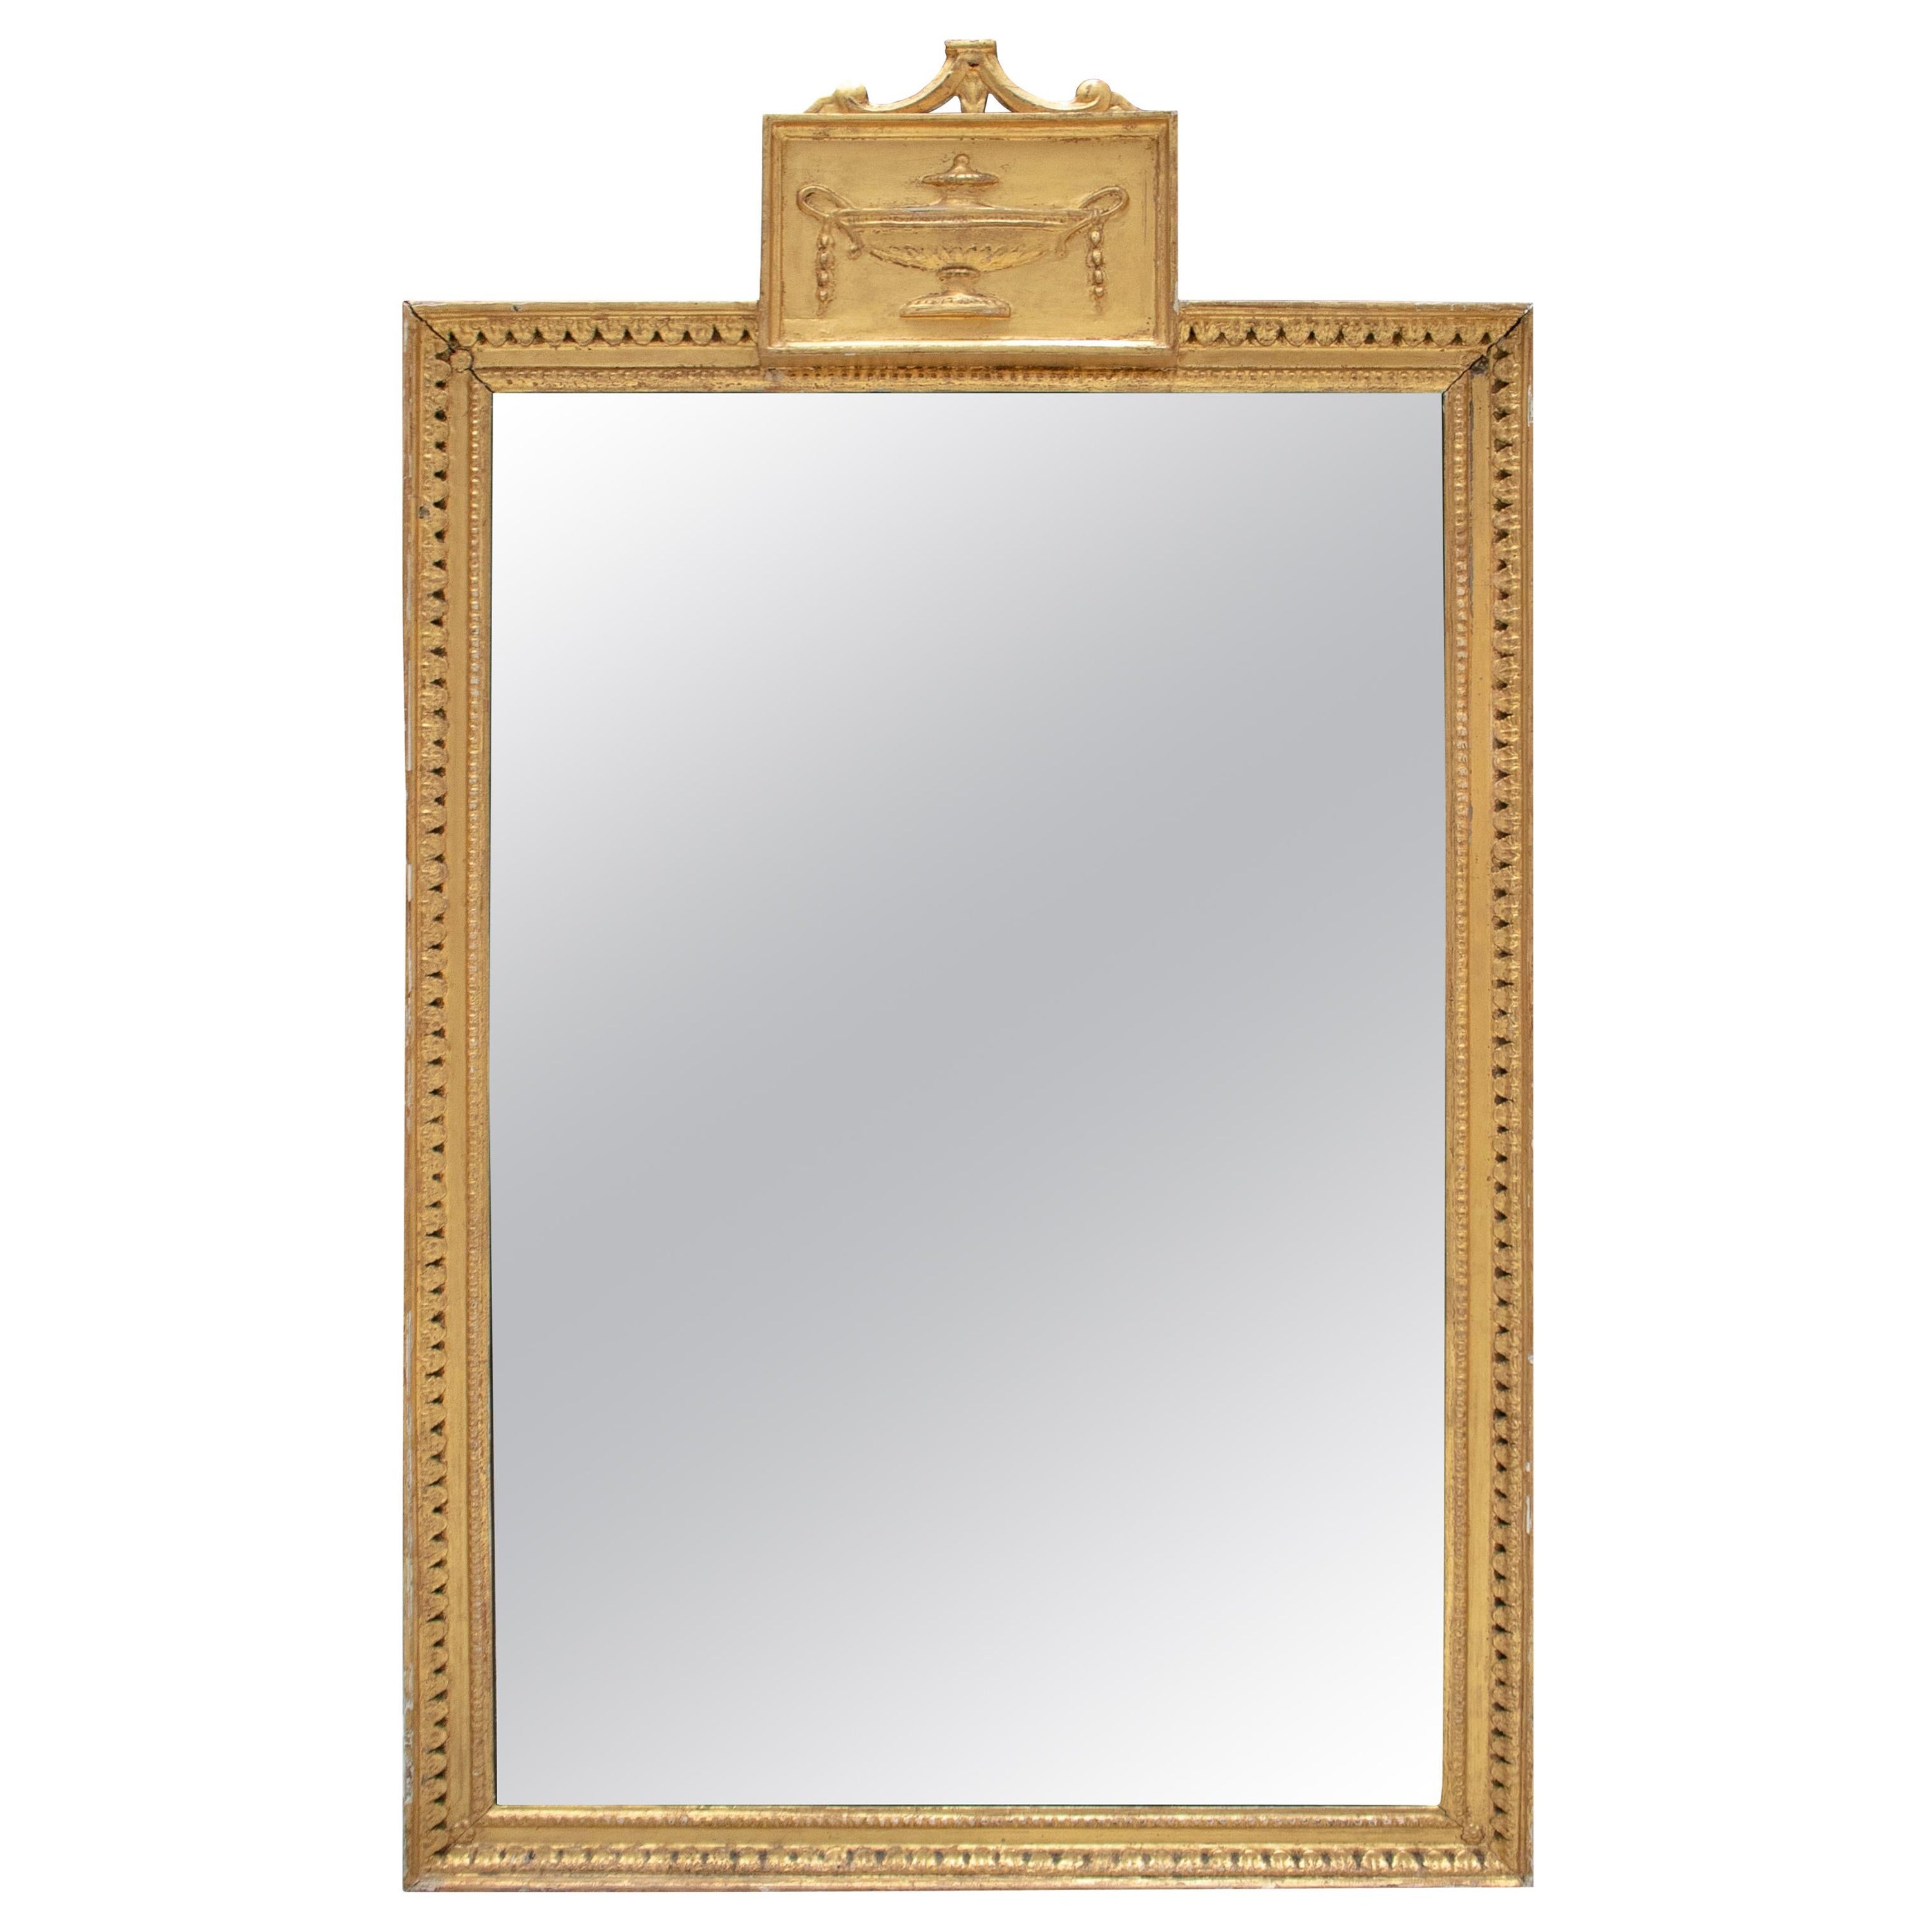 19th Century English Regency Gilt Neoclassical Mirror For Sale